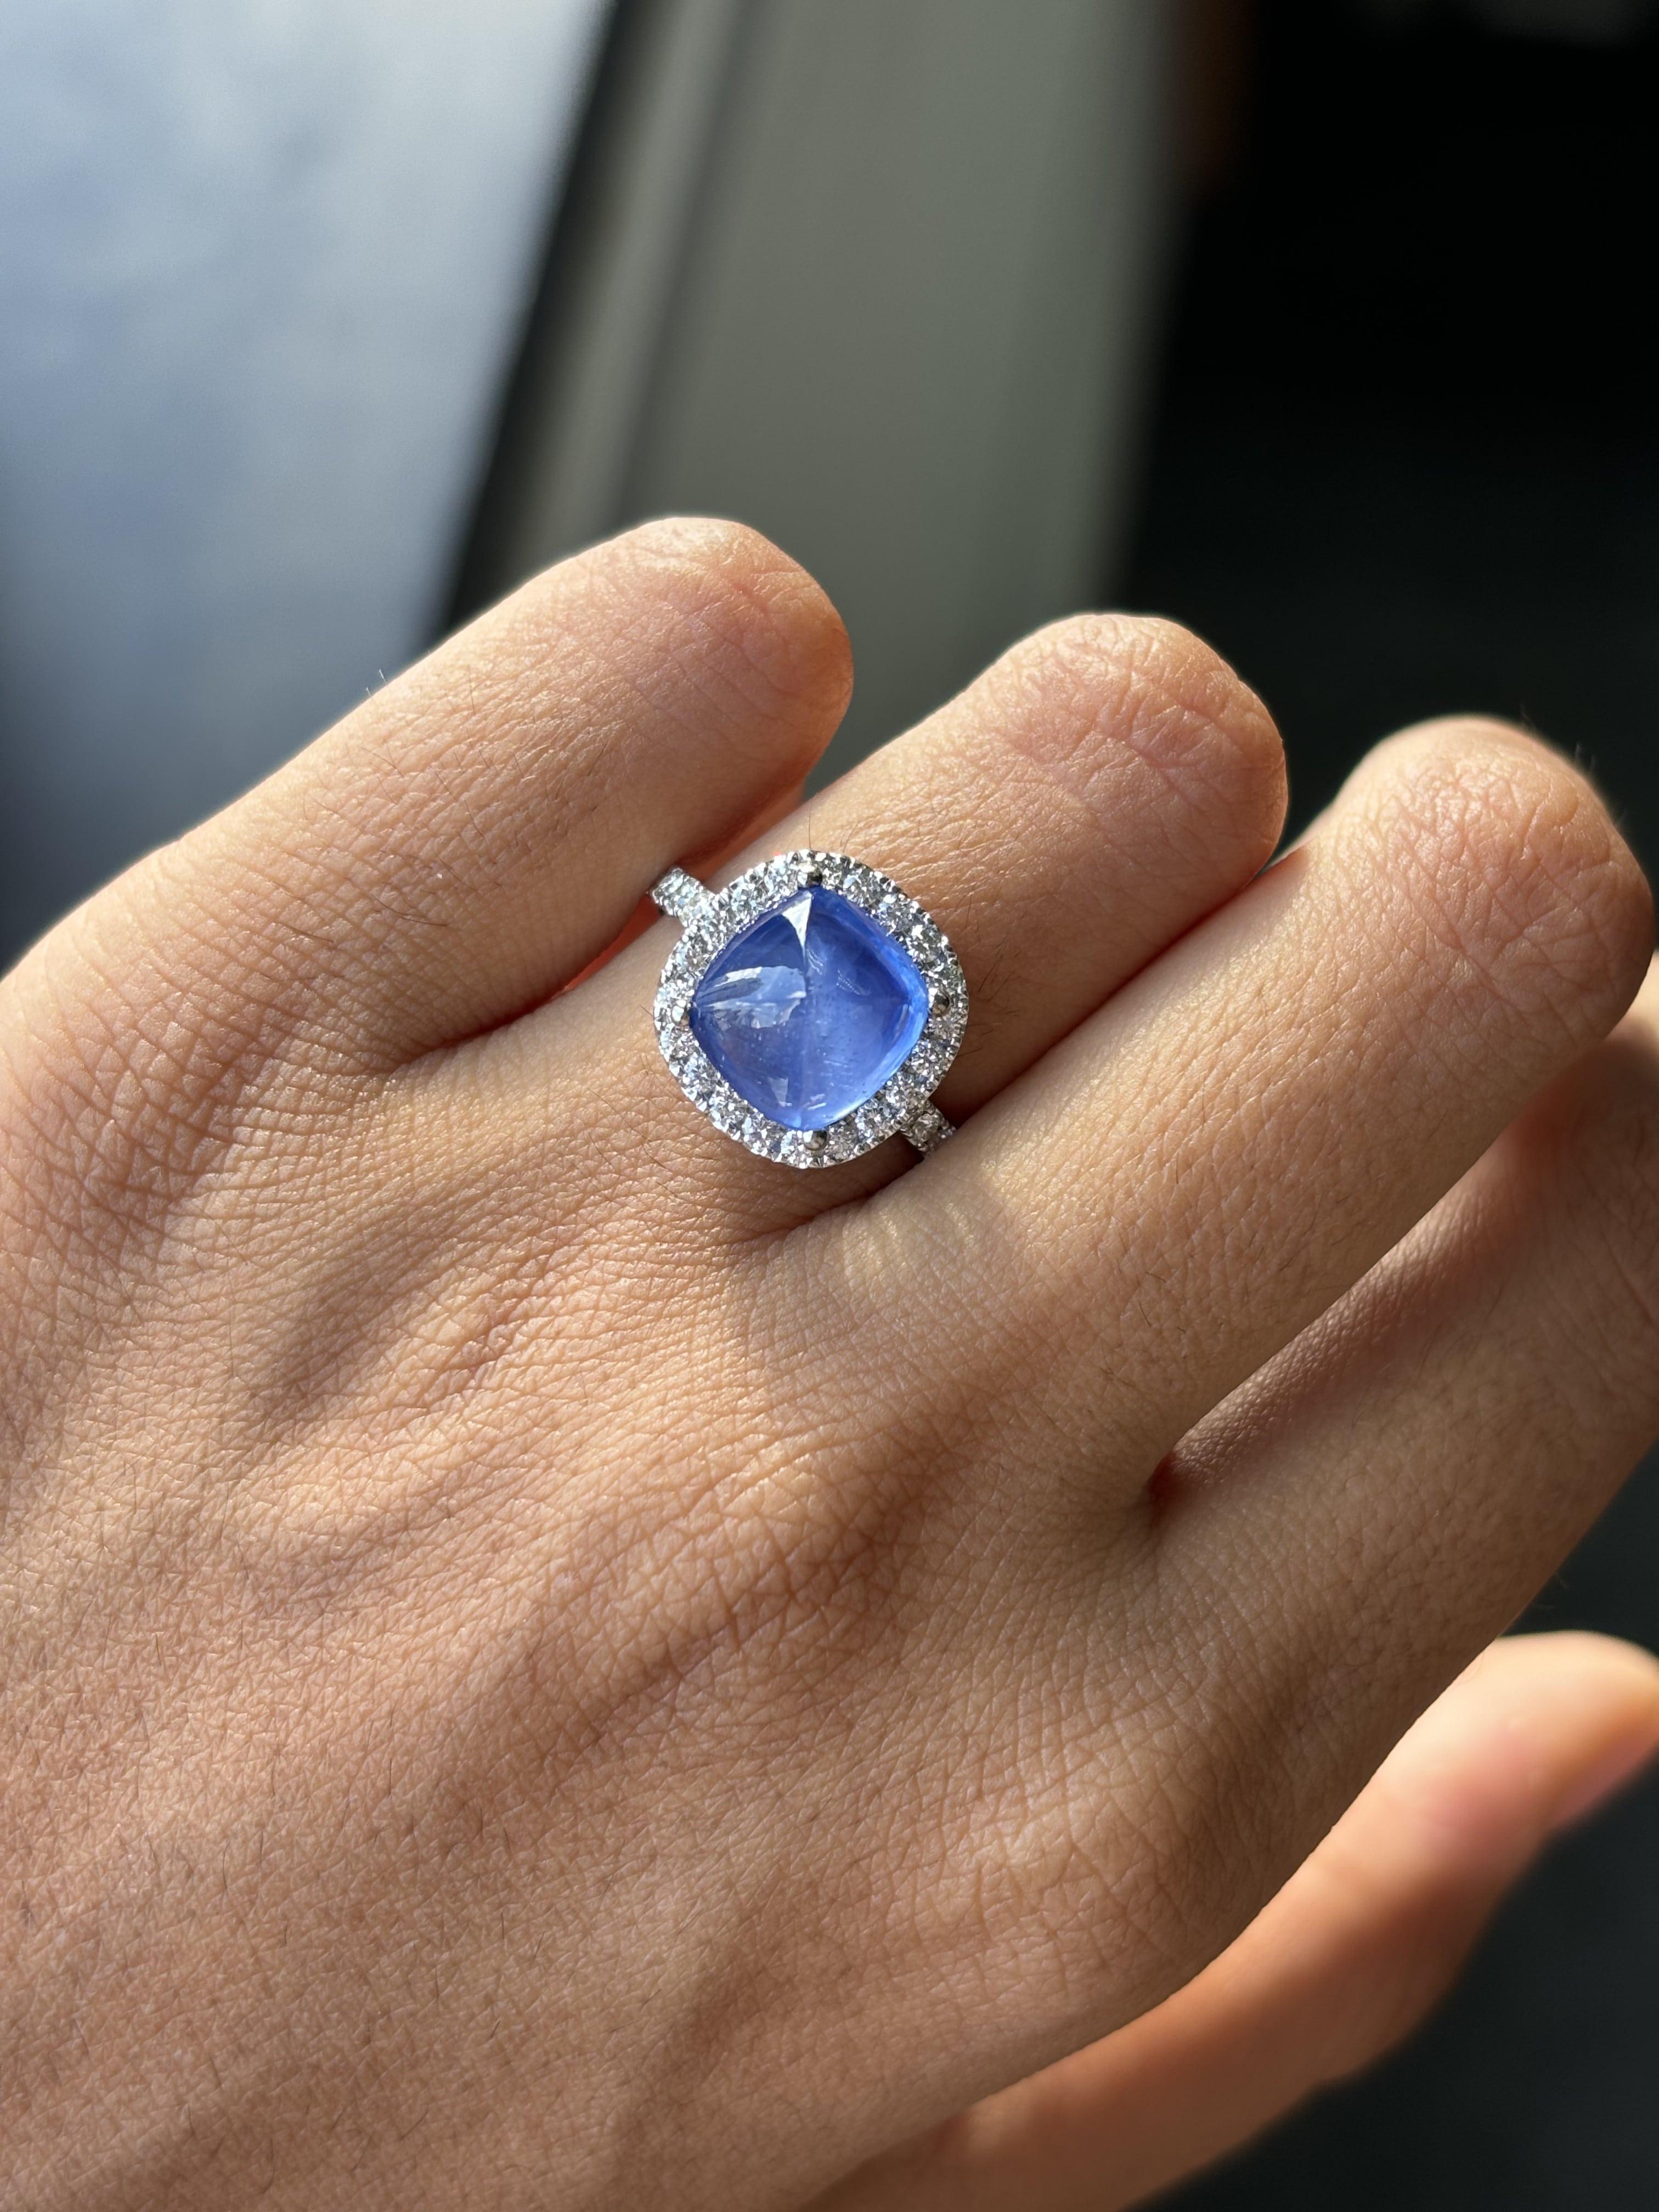 4.23 Carat Sugarloaf Ceylon Sapphire Ring with Halo Diamonds in 14K White Gold For Sale 3